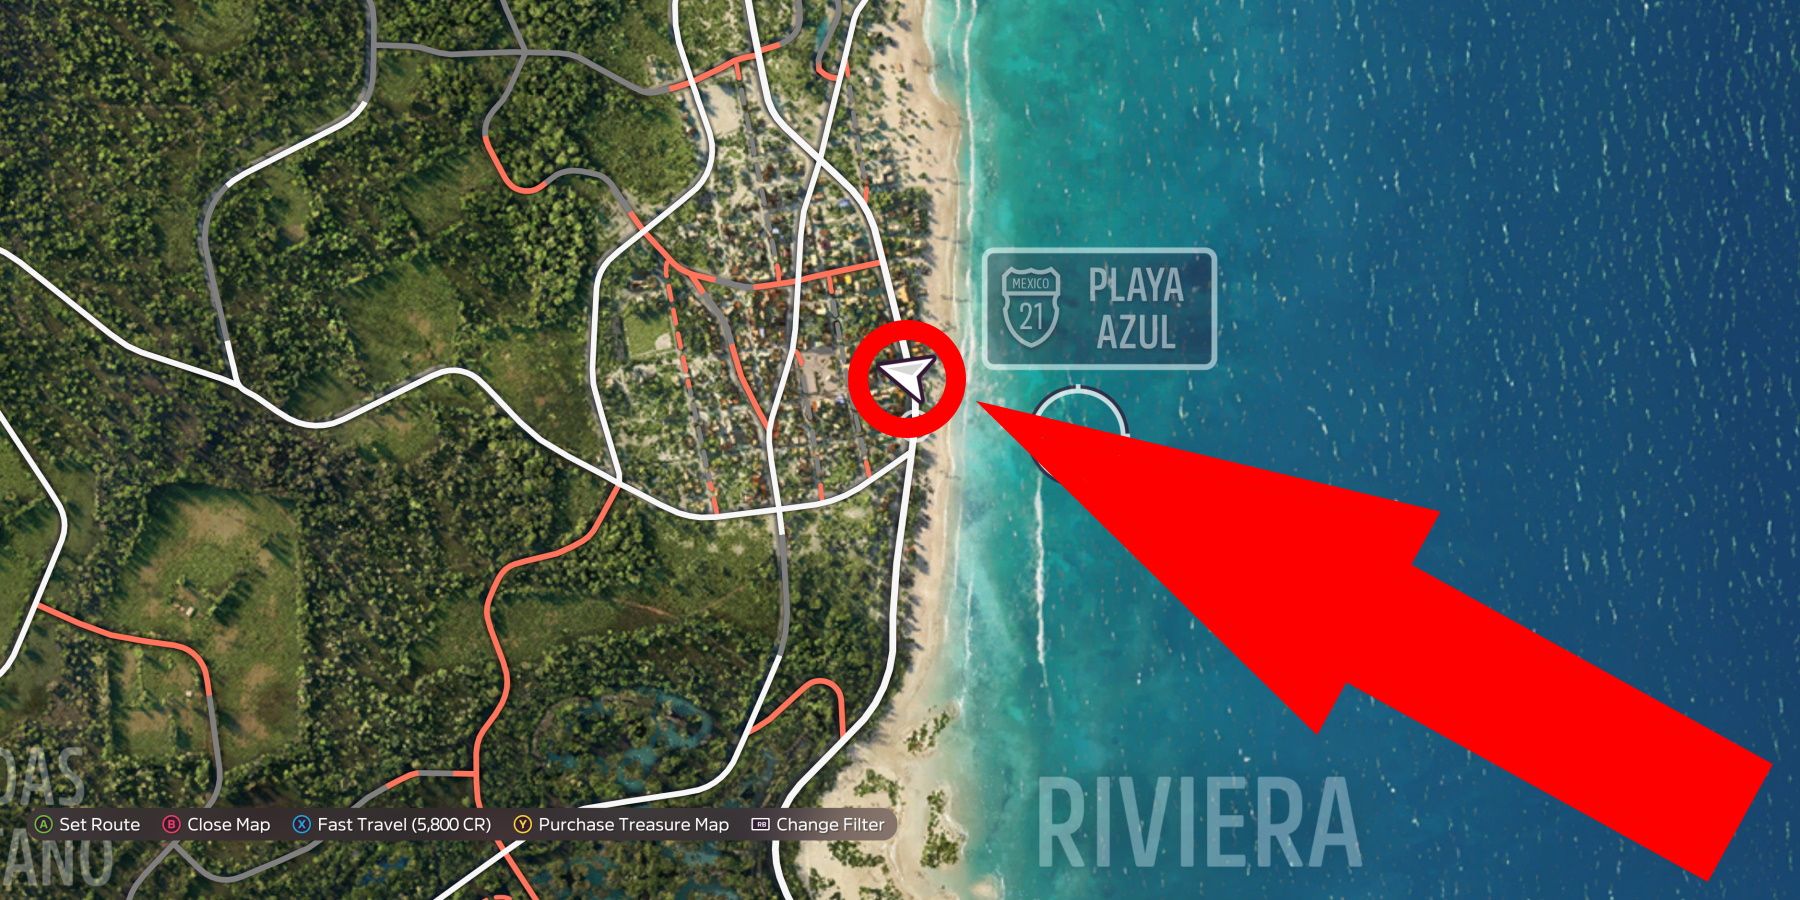 Rueda's Lion Mural location circled and arrow point at it in Forza Horizon 5